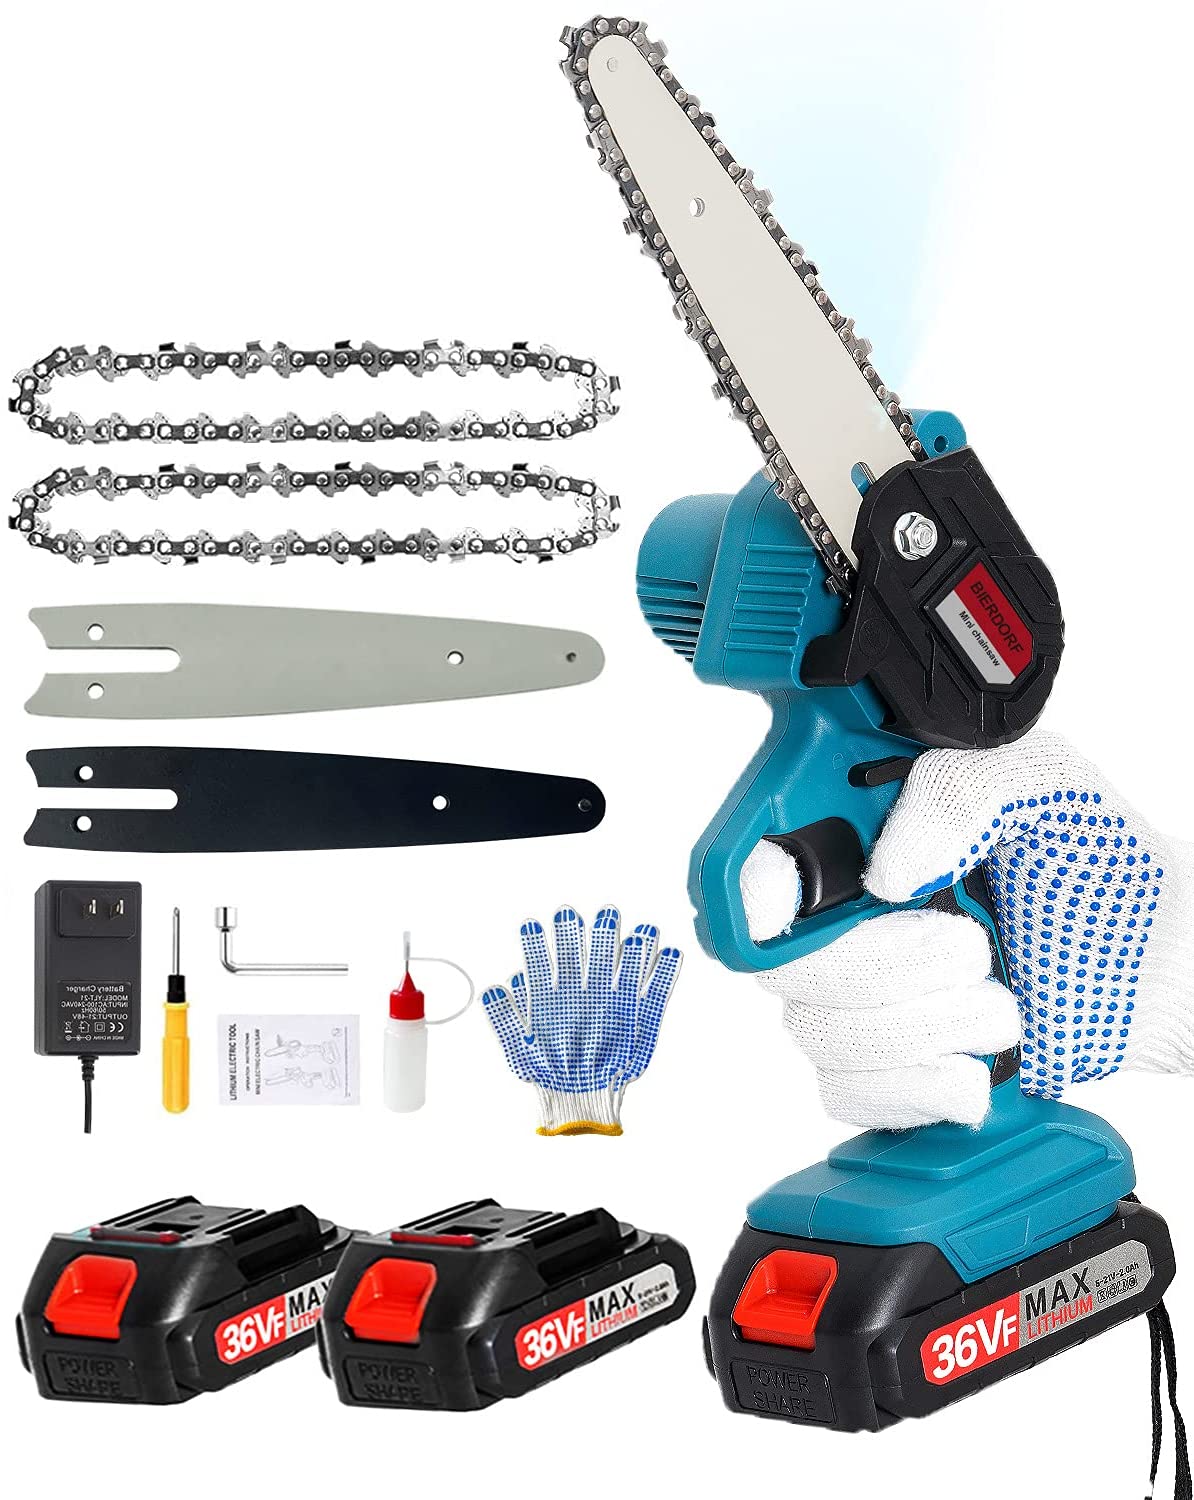 Best Mini Chainsaw (Top 10 Reviews and Buying Guide) Chainsaw Larry